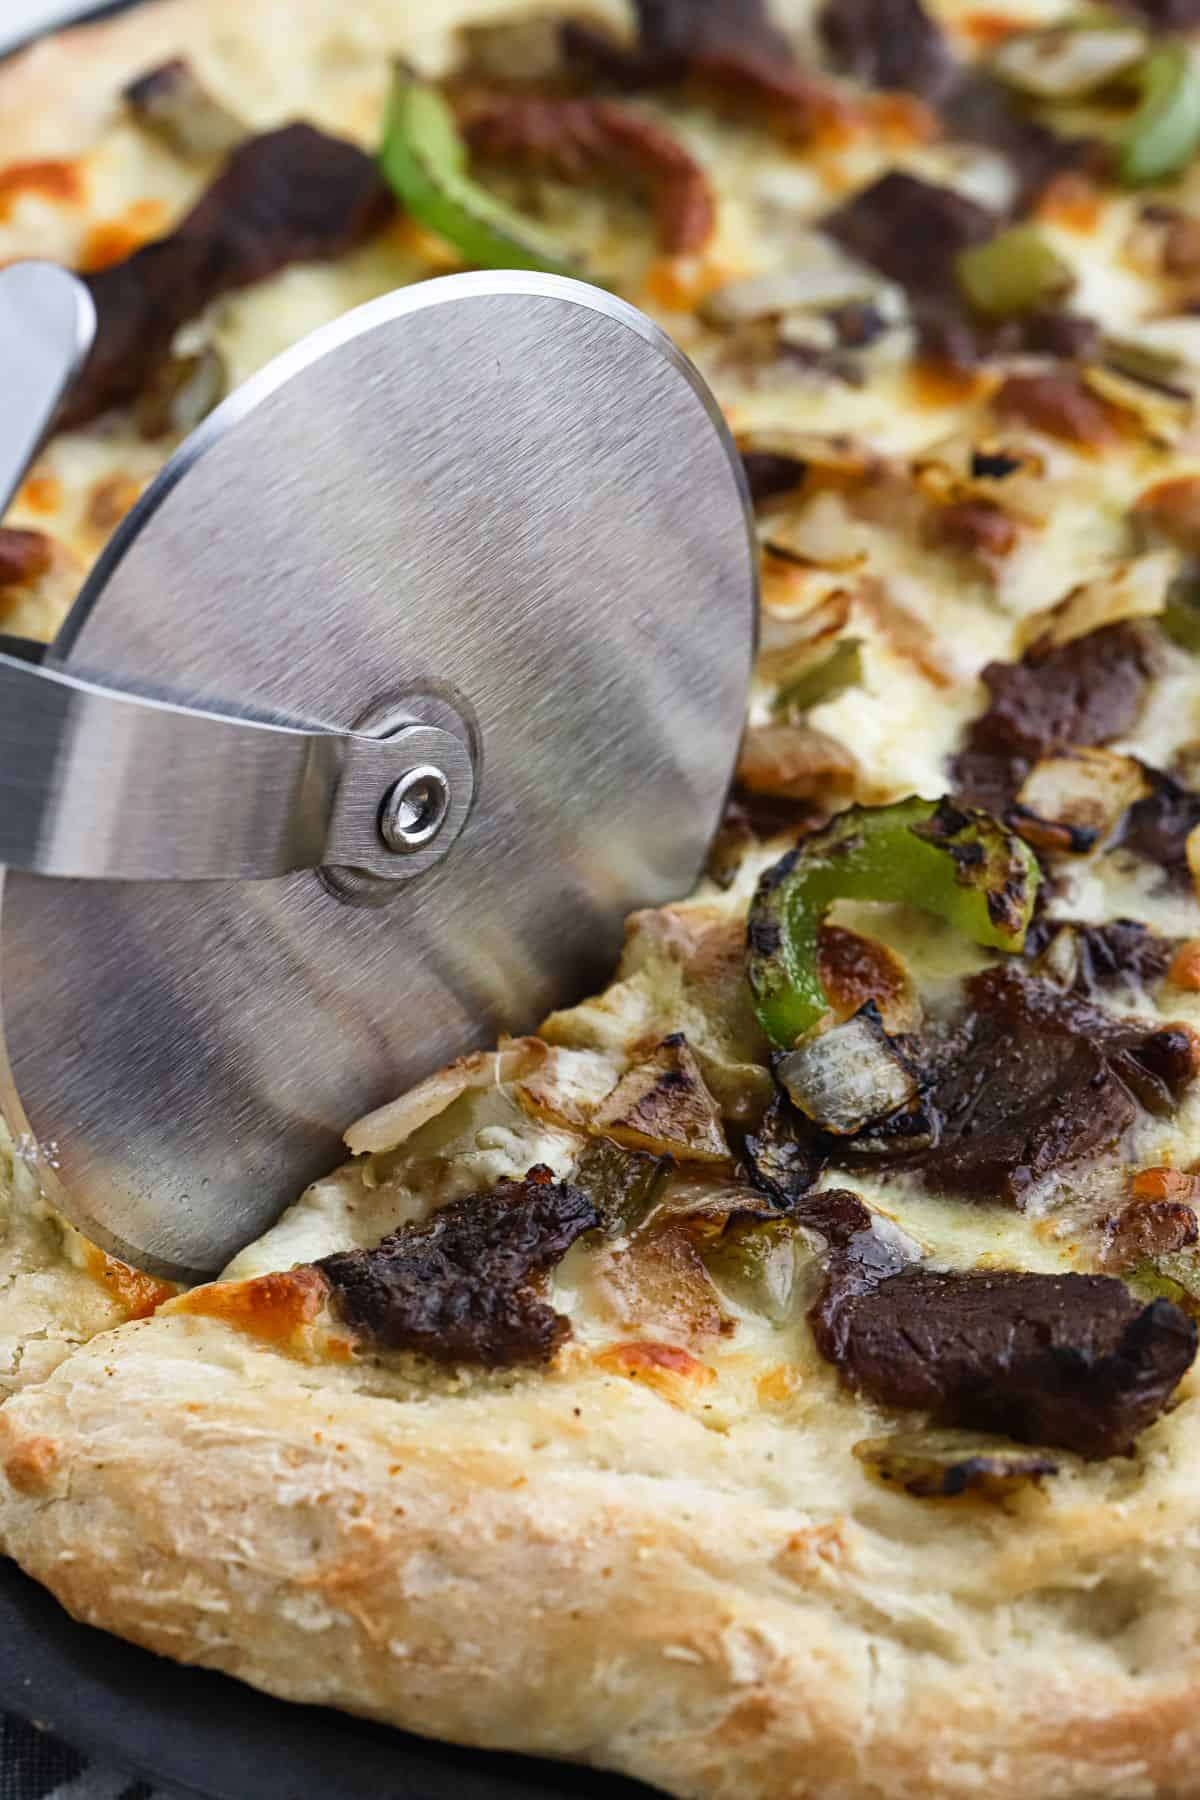 A pizza wheel slicing a piece of steak pizza.